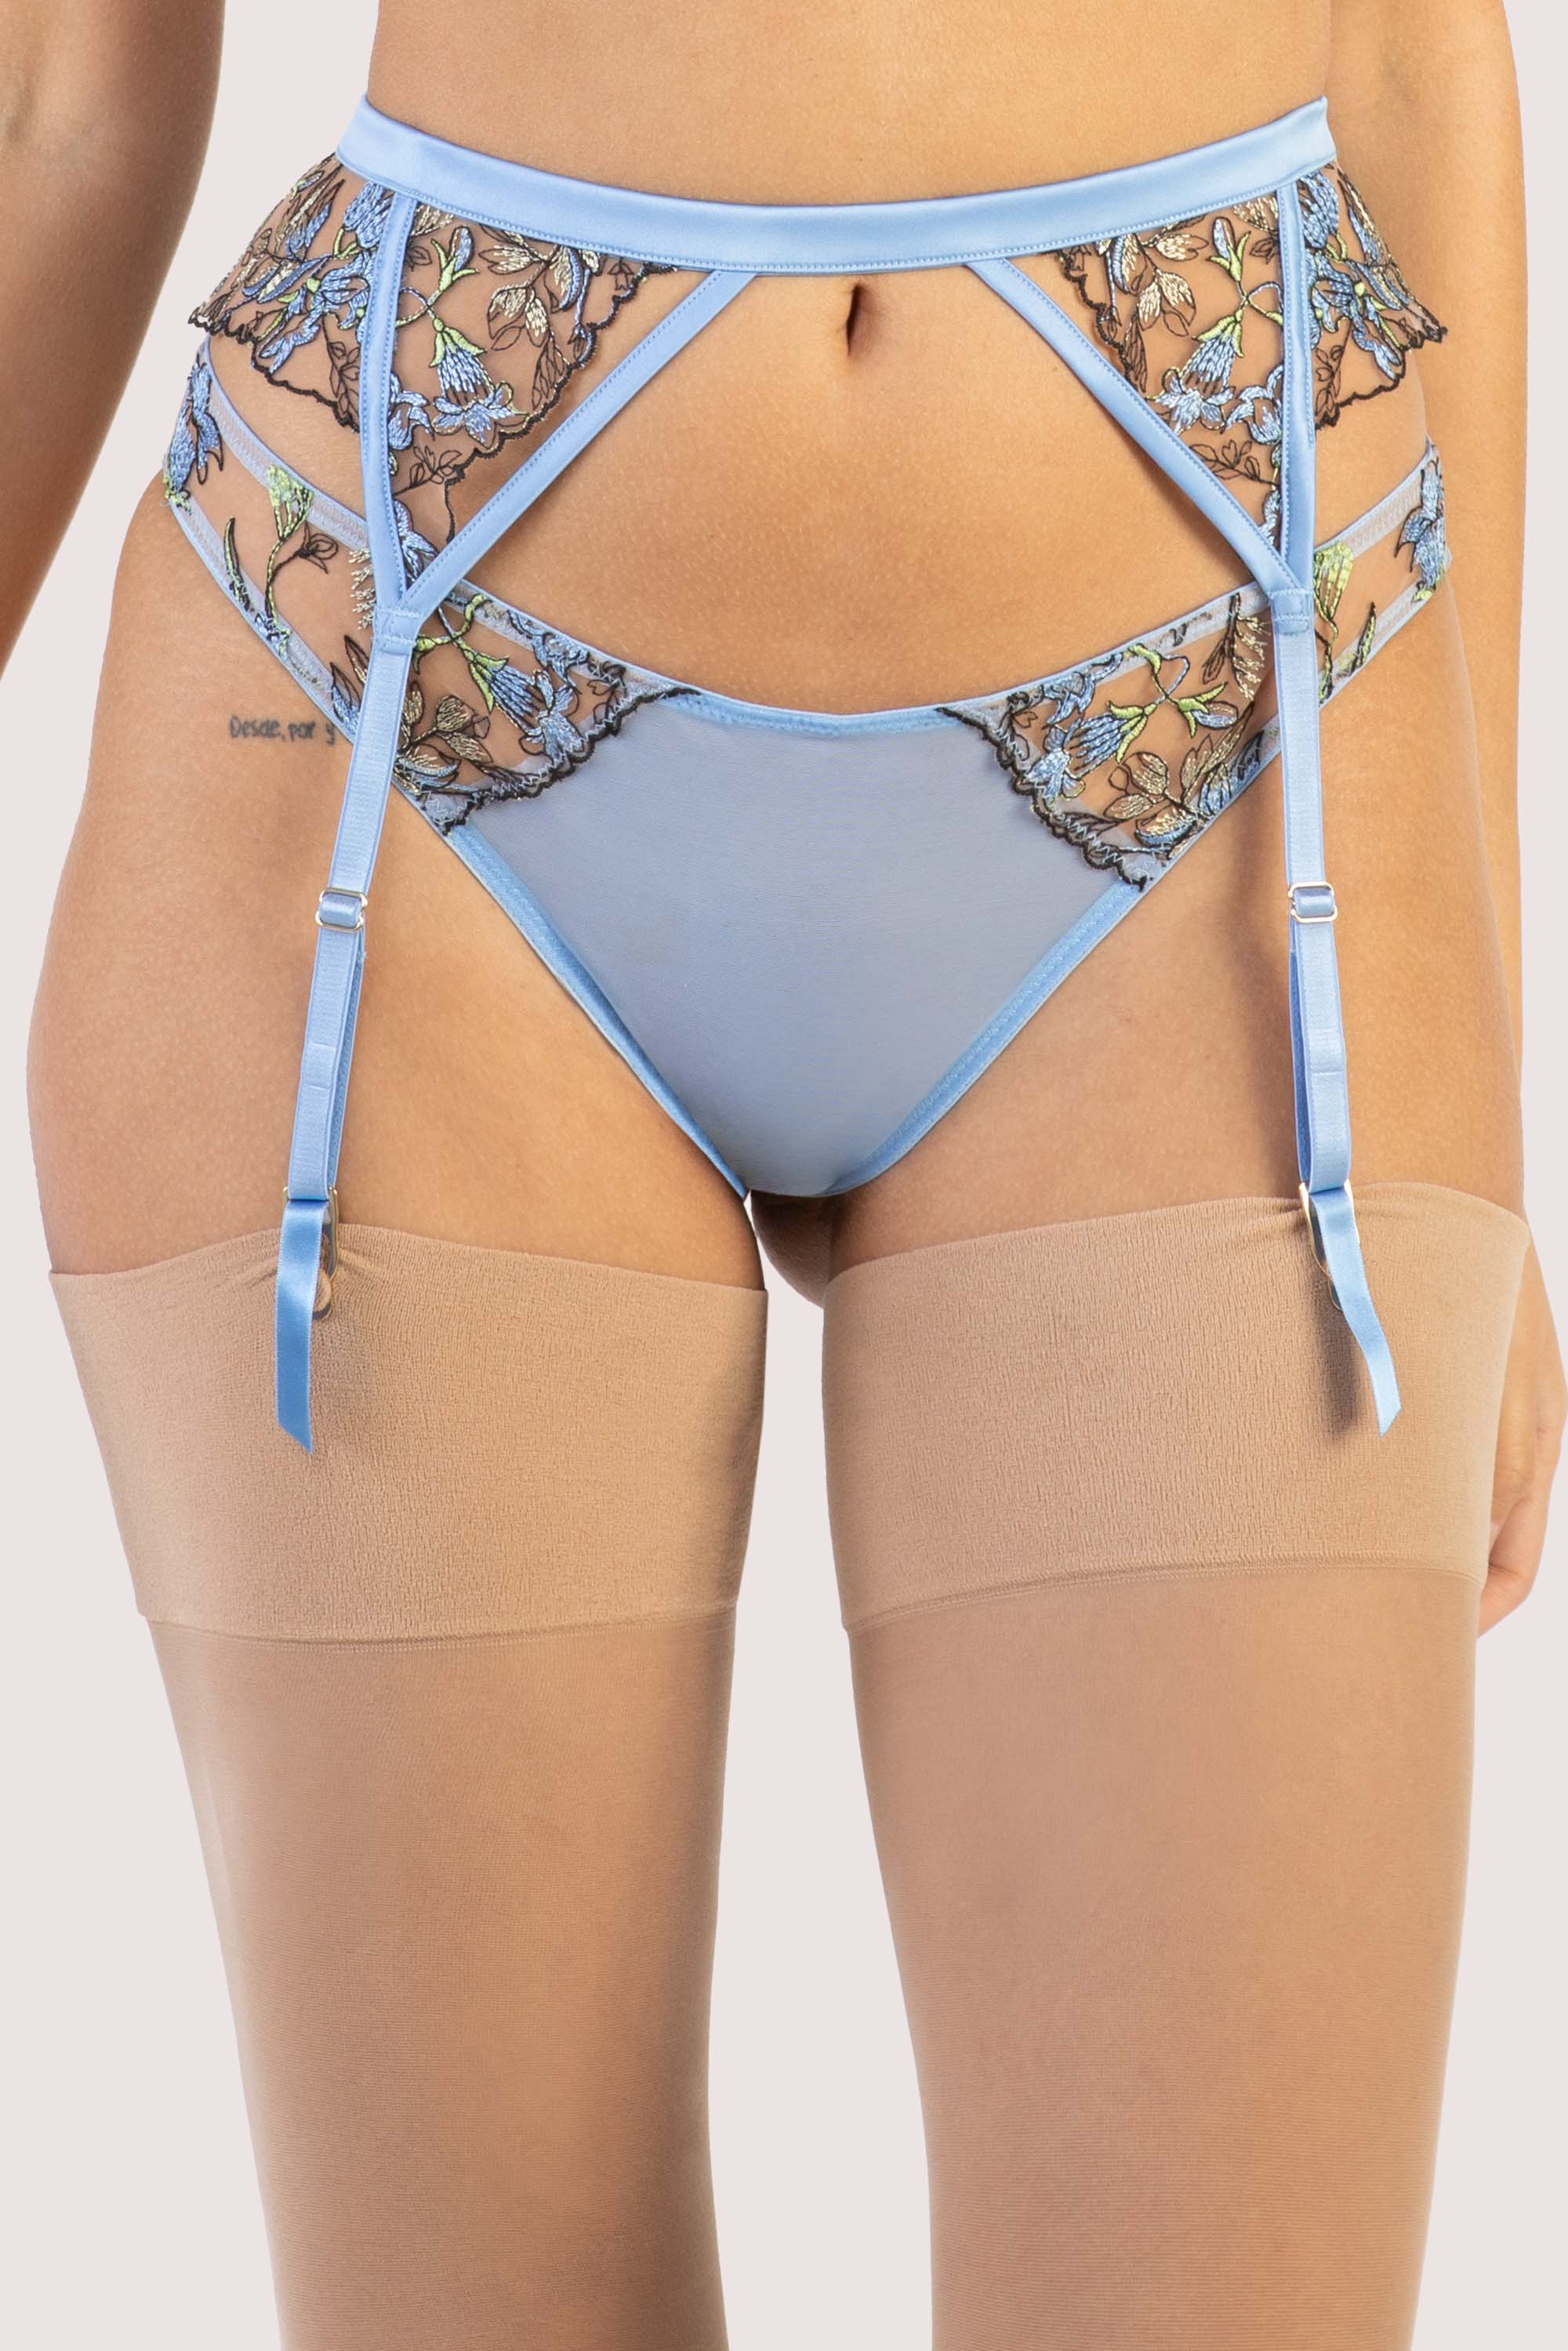 Is there a proper way to wear panties over or under the suspender belt?